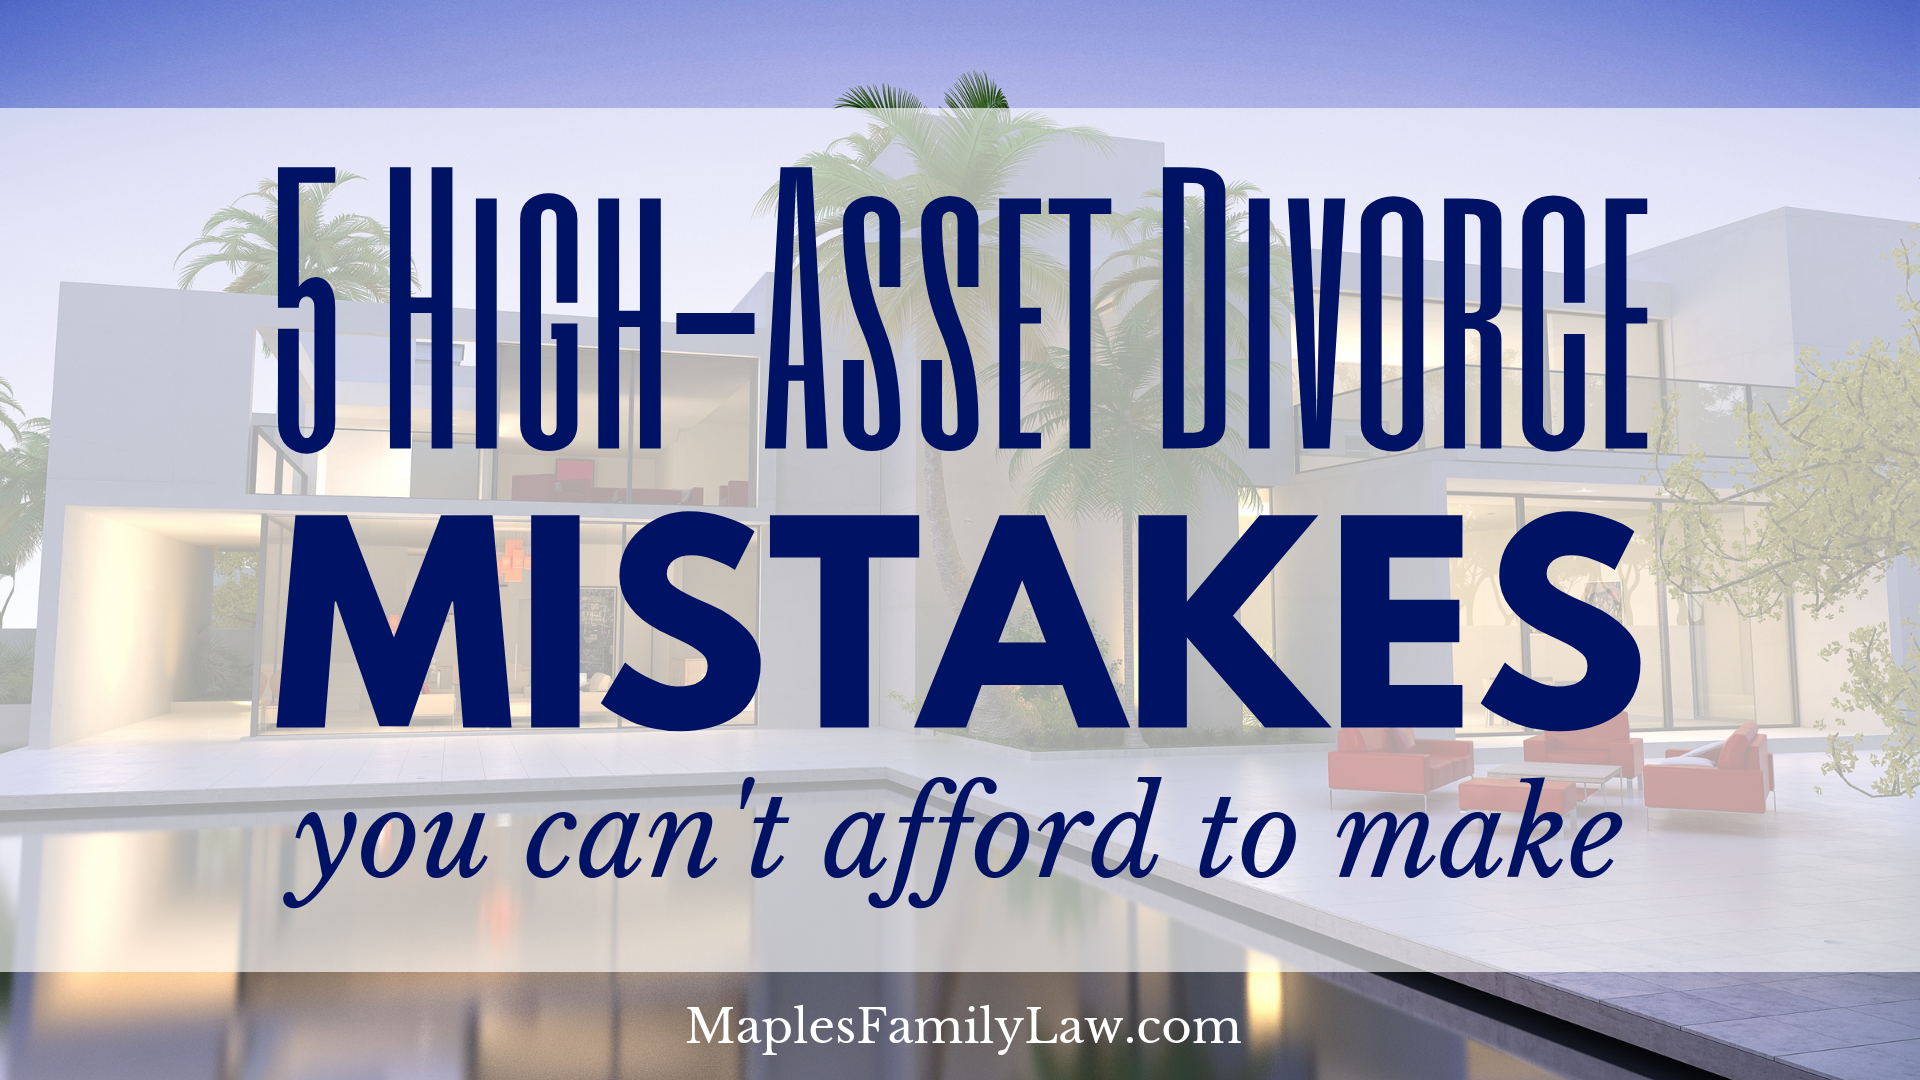 5 High-Asset Divorce Mistakes You Can't Afford to Make